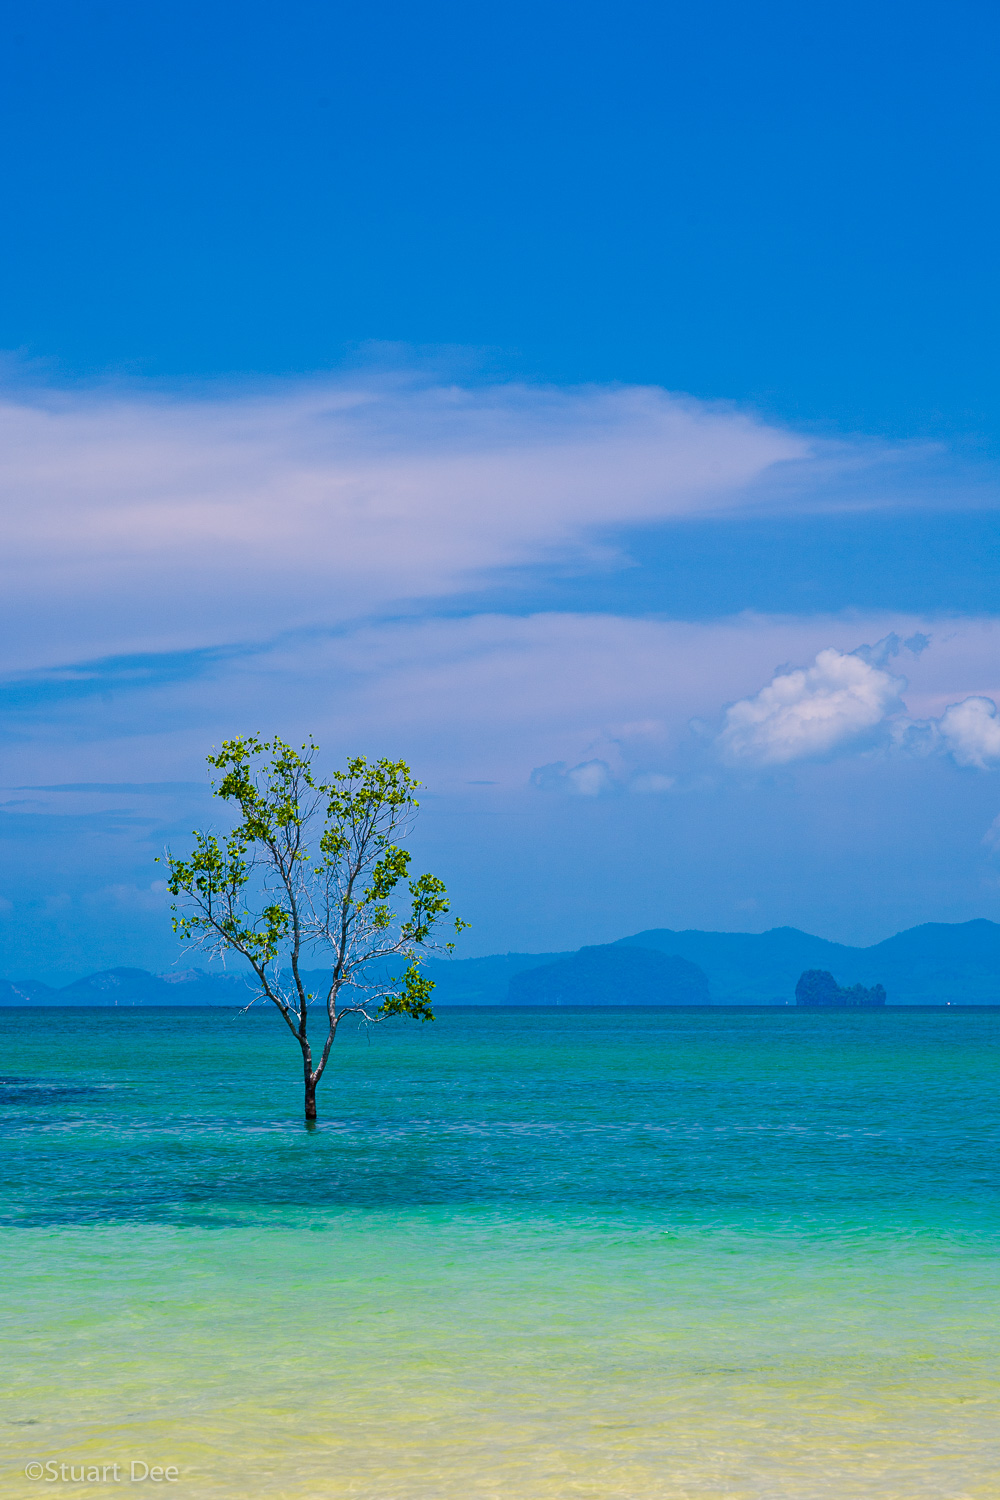  Lone tree growing in the middle of the sea, Krabi, Krabi Province, Thailand 